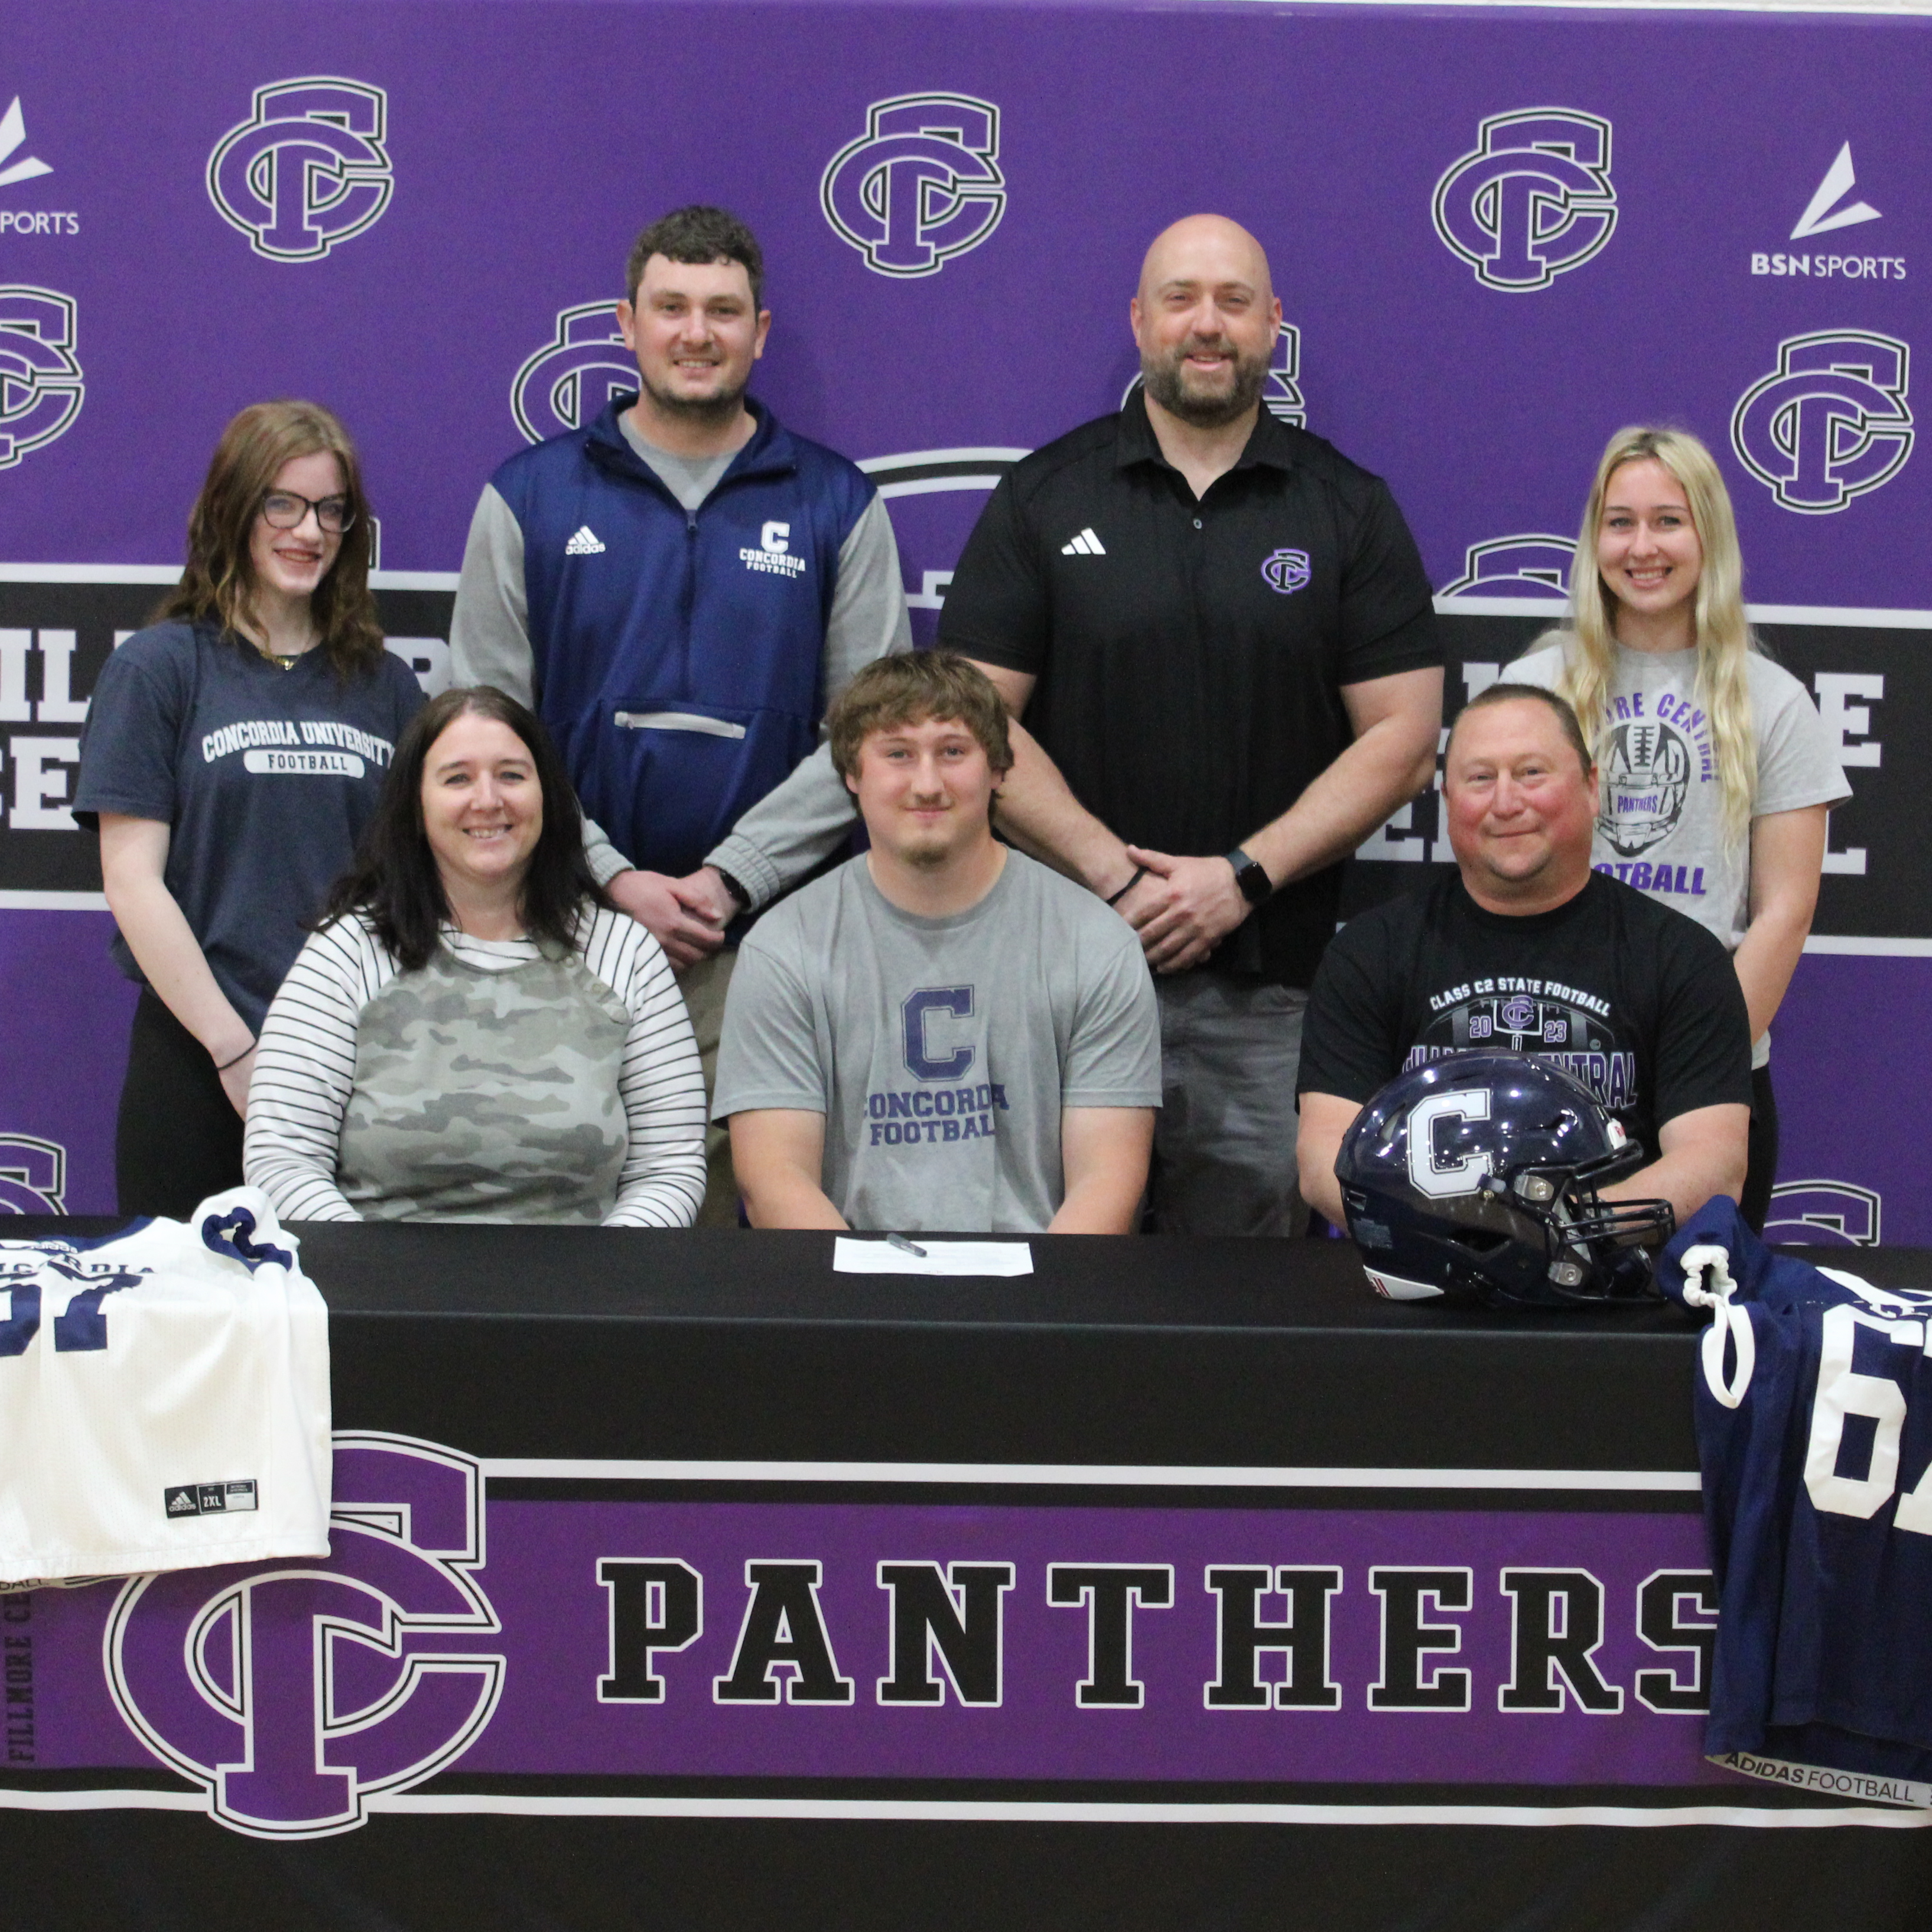 Hunter L. signed his letter of intent to play football at Concordia University in the fall.